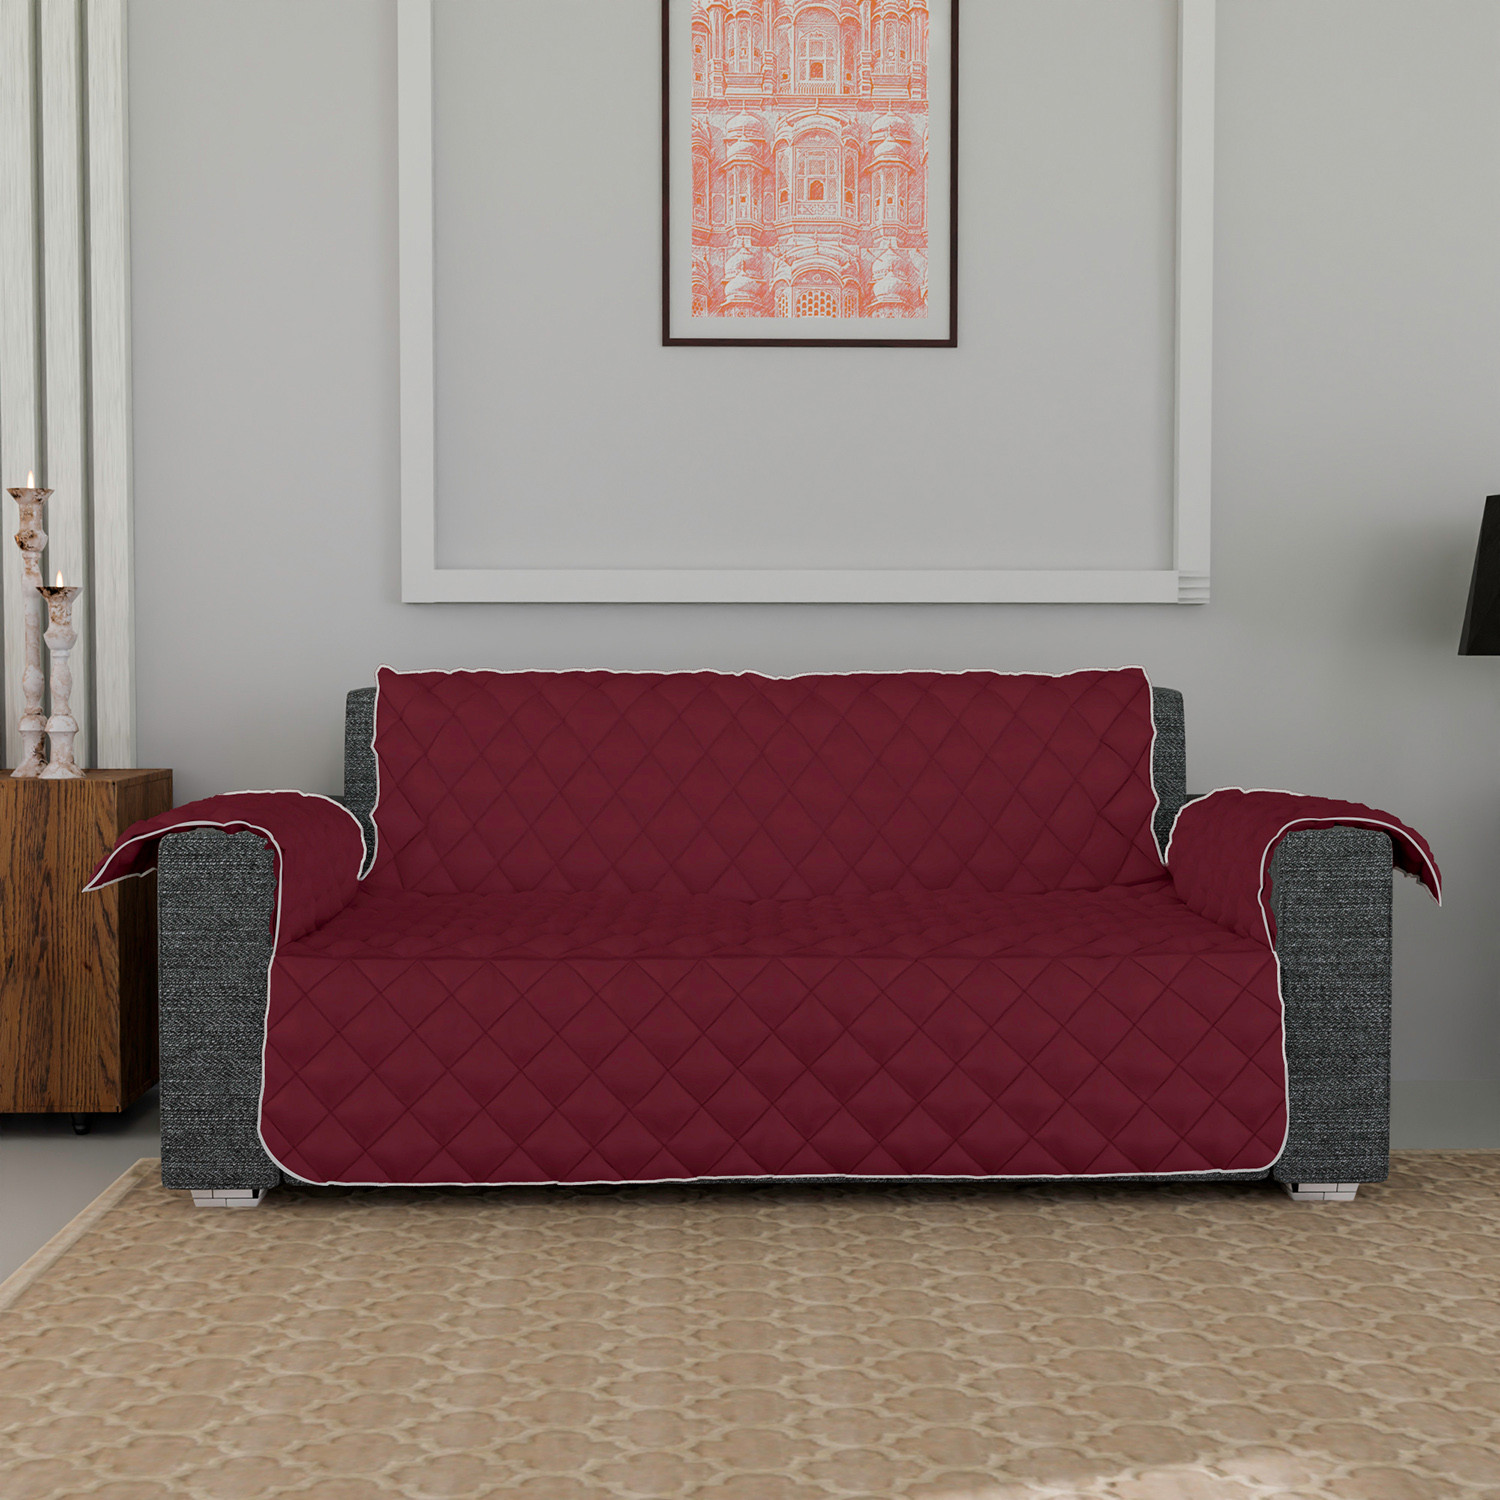 Kuber Industries Both Sided 3 Seater Sofa Cover|Polyester Check Design Couch Cover|Non-Slip Stretchy Sofa Slipcovers (Maroon & Gray)